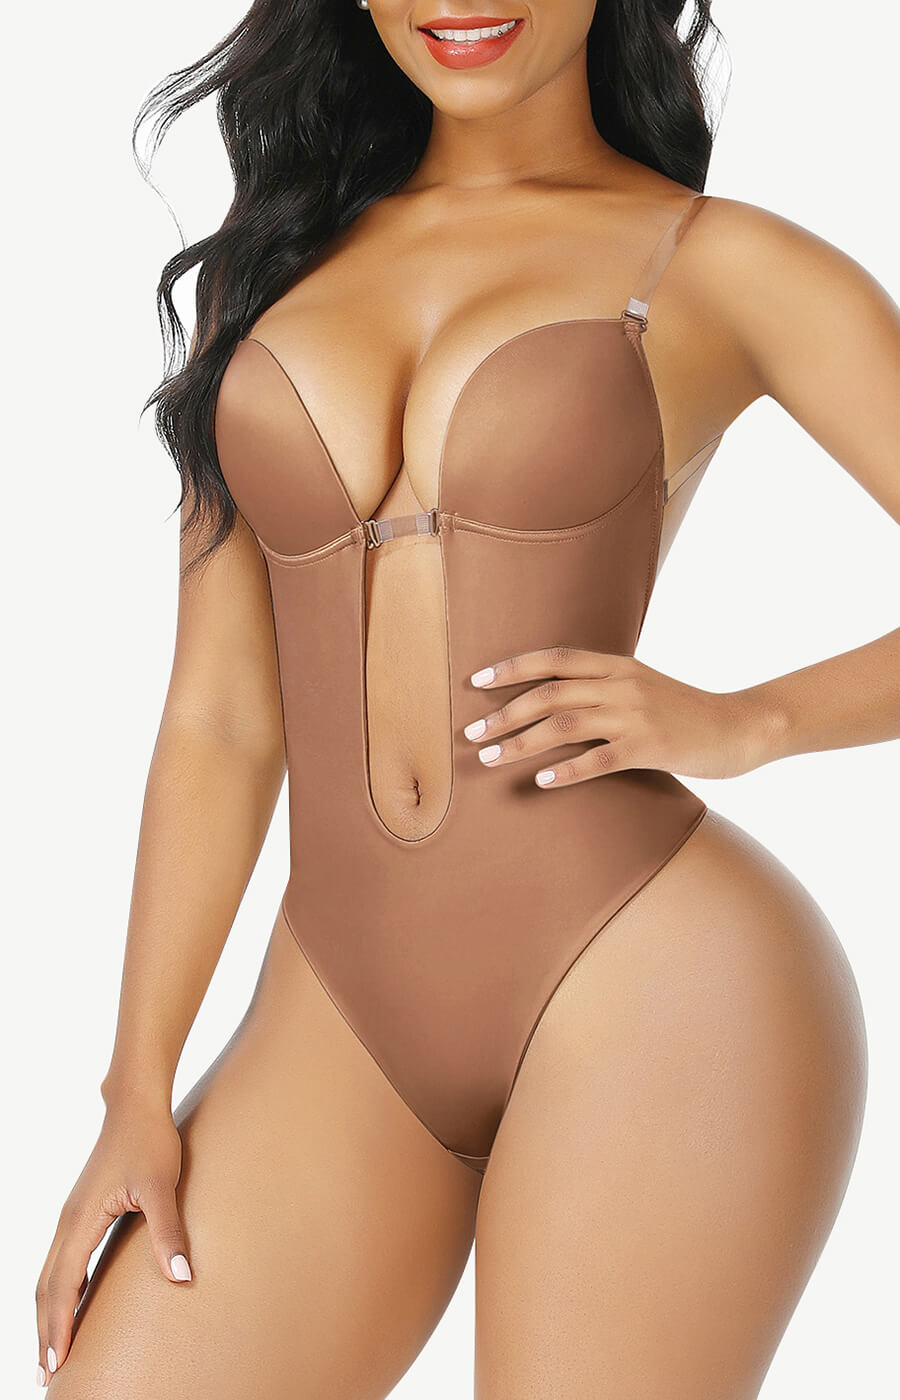 BACKLESS THONG BODYSUIT WITH BUILT IN BRA – NUESKIN